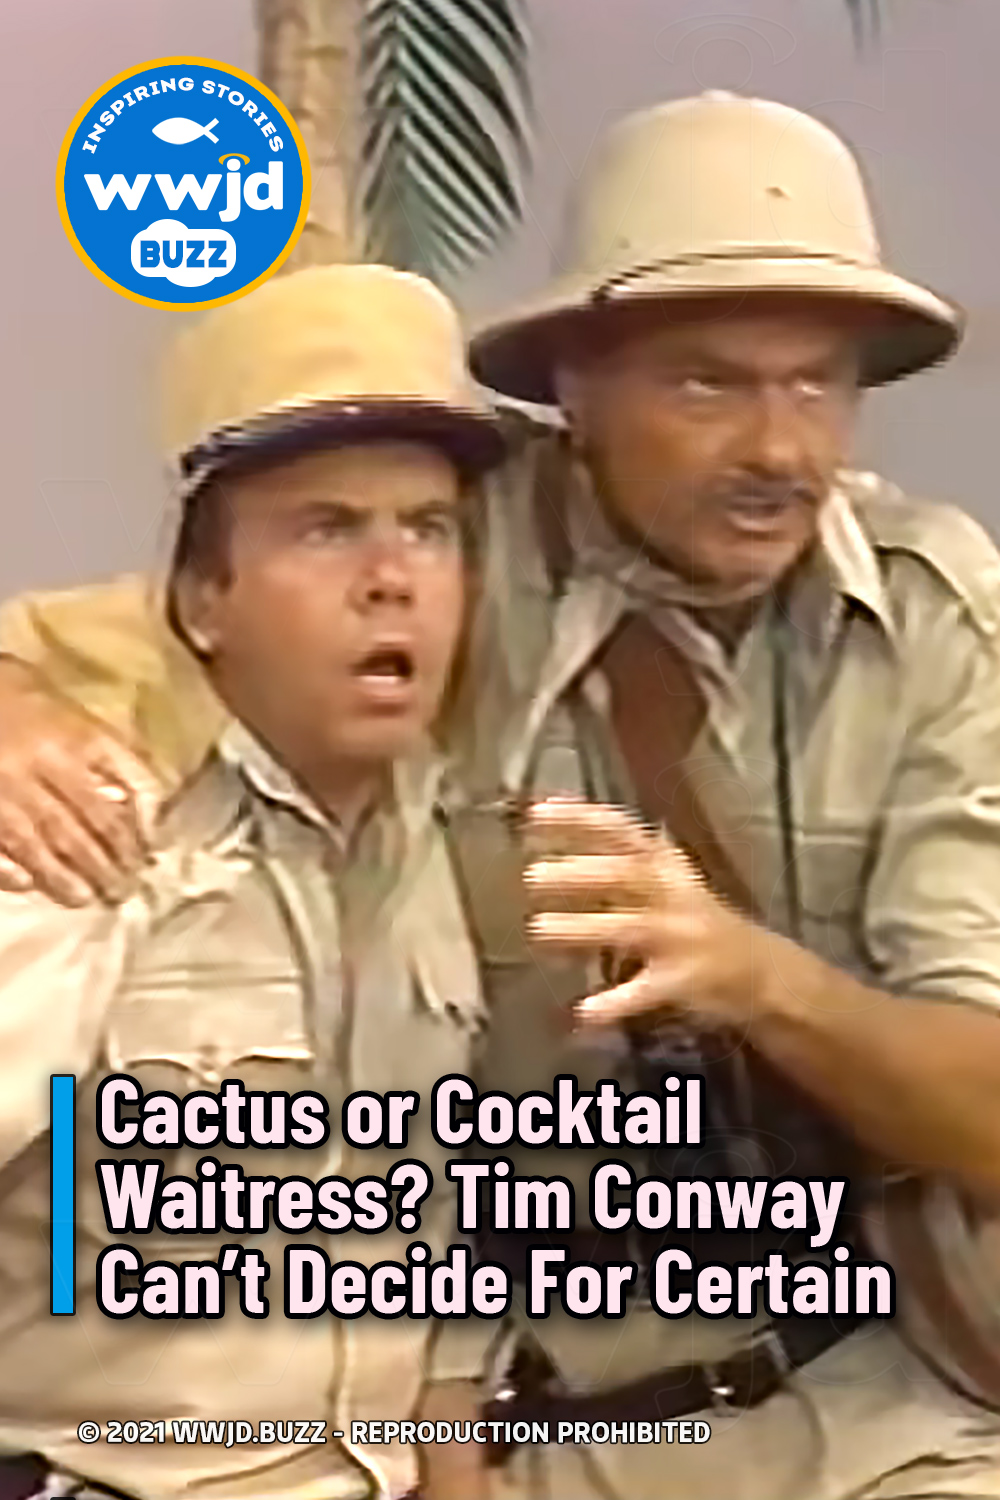 Cactus or Cocktail Waitress? Tim Conway Can’t Decide For Certain